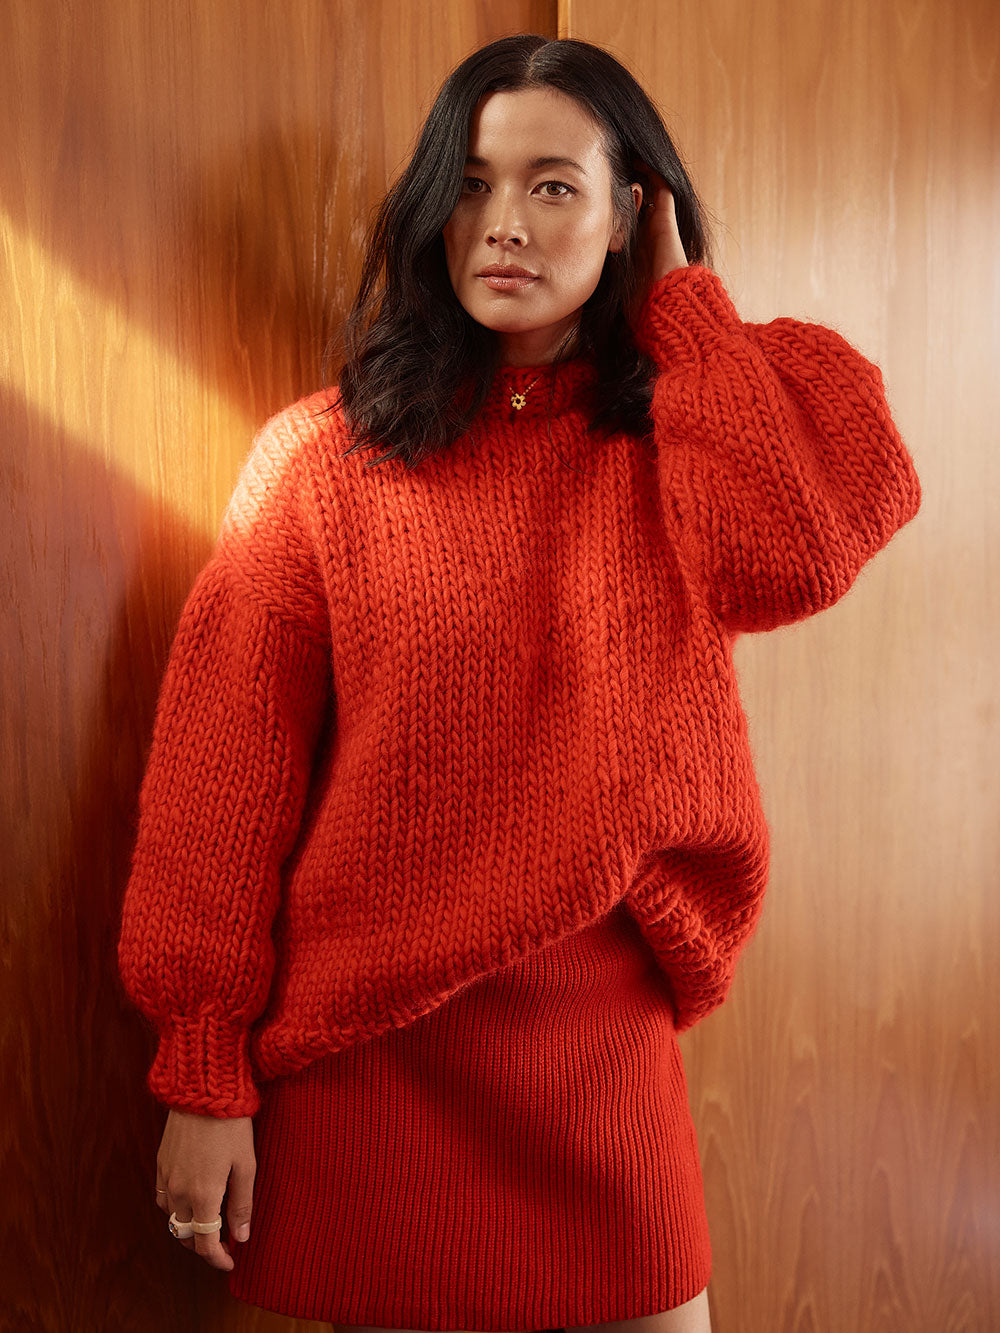 Woman standing in front of wardrobe wears a bright red chunky knitted jumper and red skirt